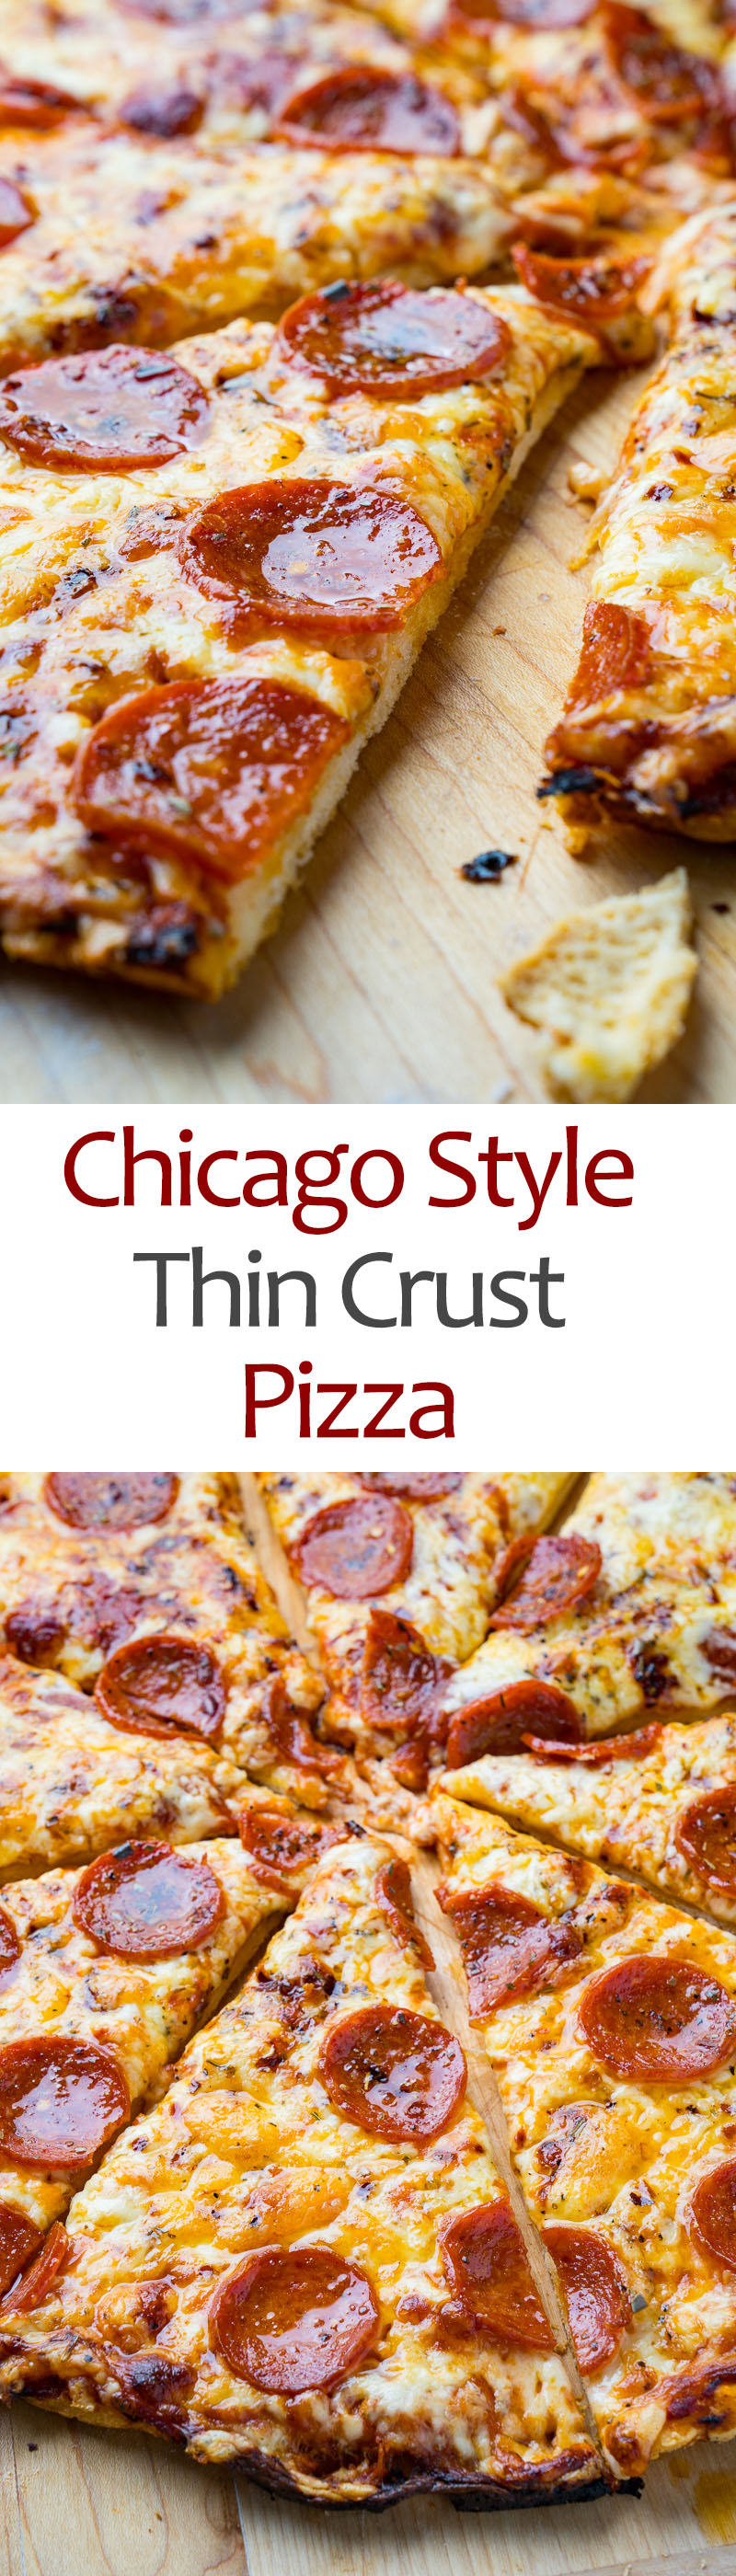 Chicago Style Thin Crust Pizza